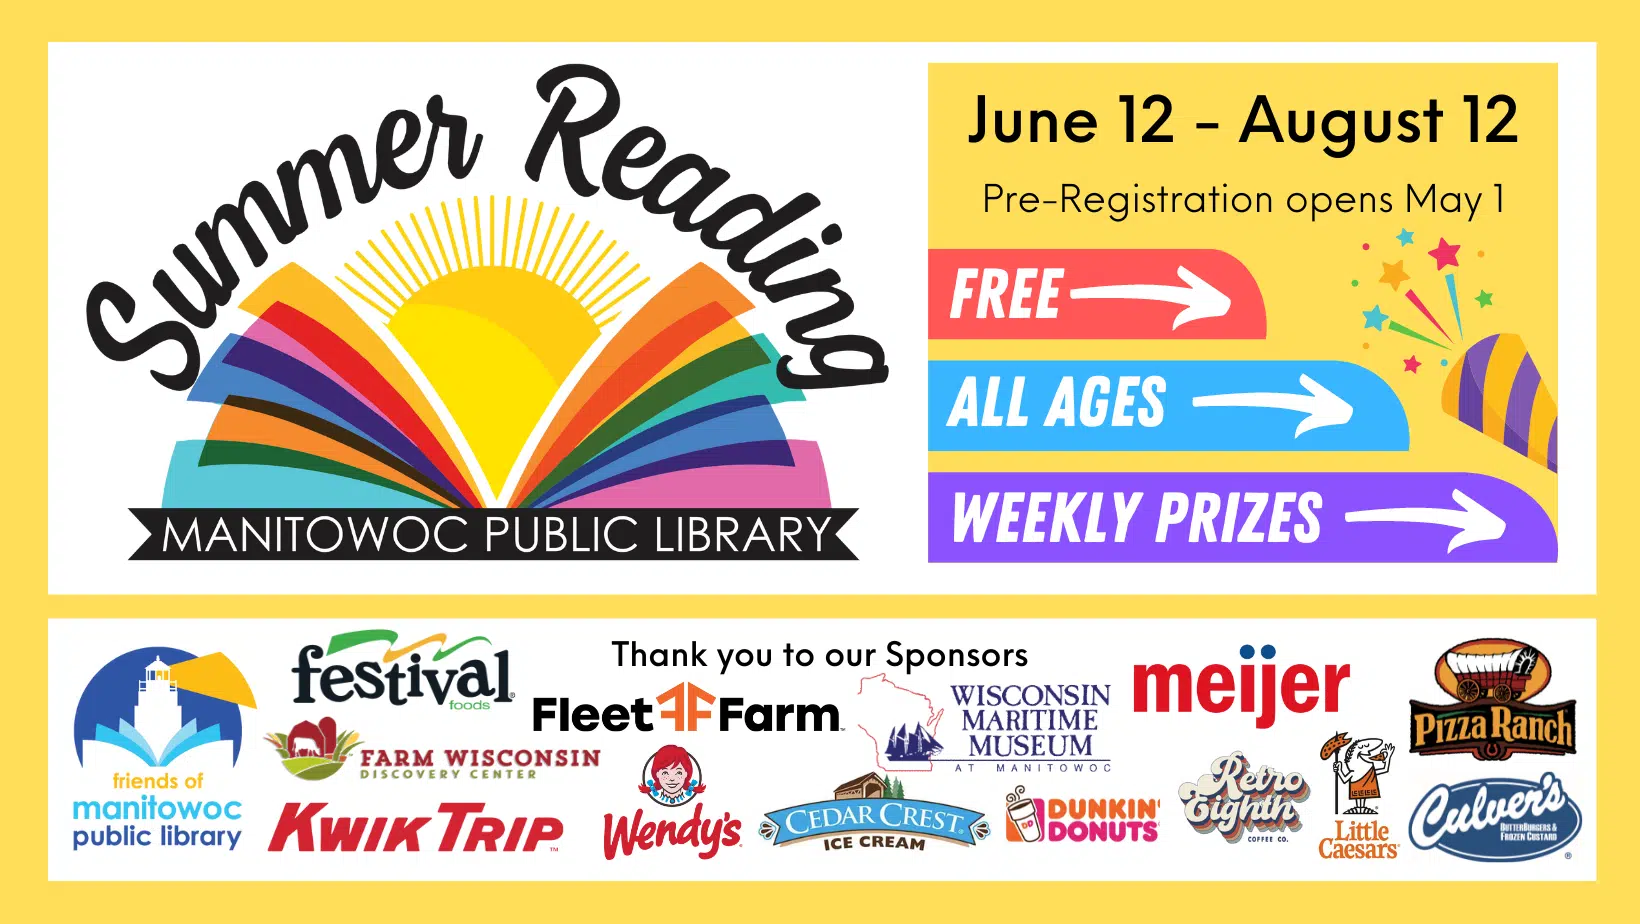 Manitowoc Public Library Summer Reading Program Continues with More